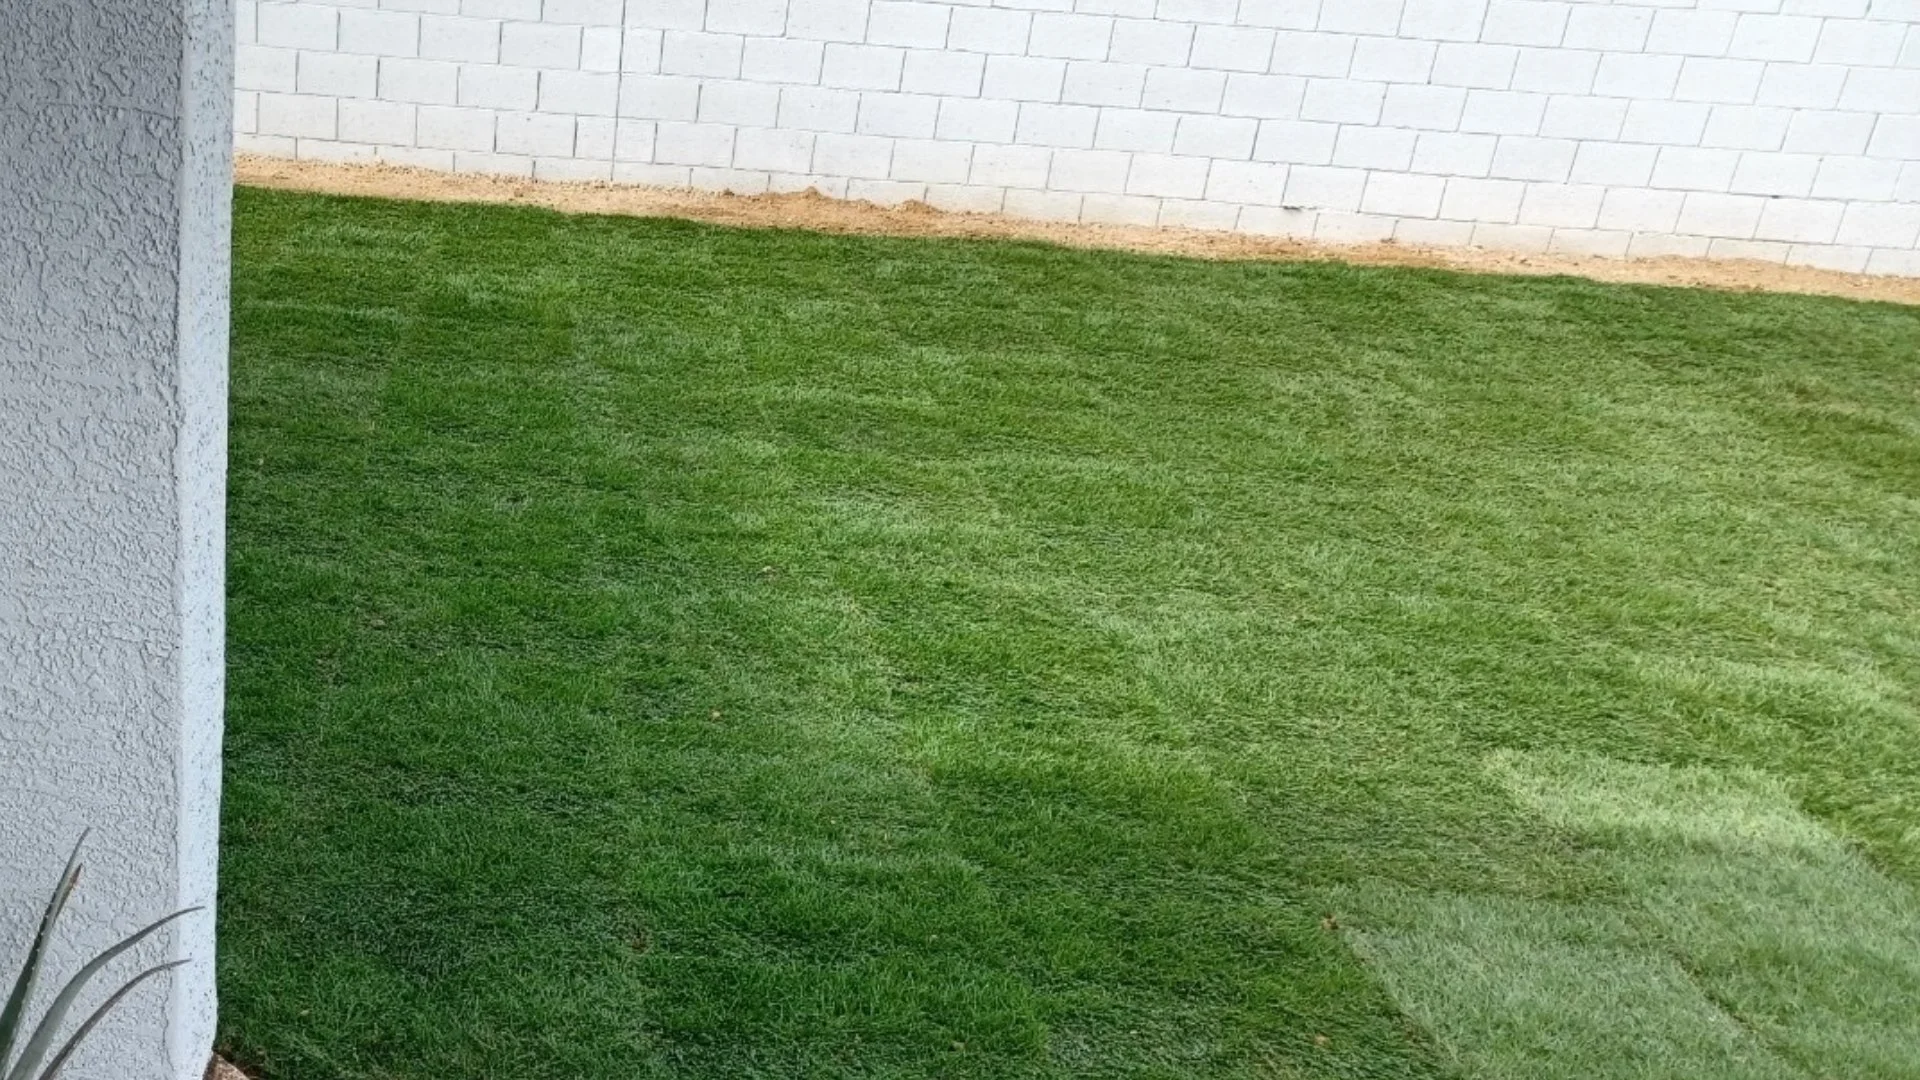 Things You Should Know Before Mowing Your New Sod for the First Time